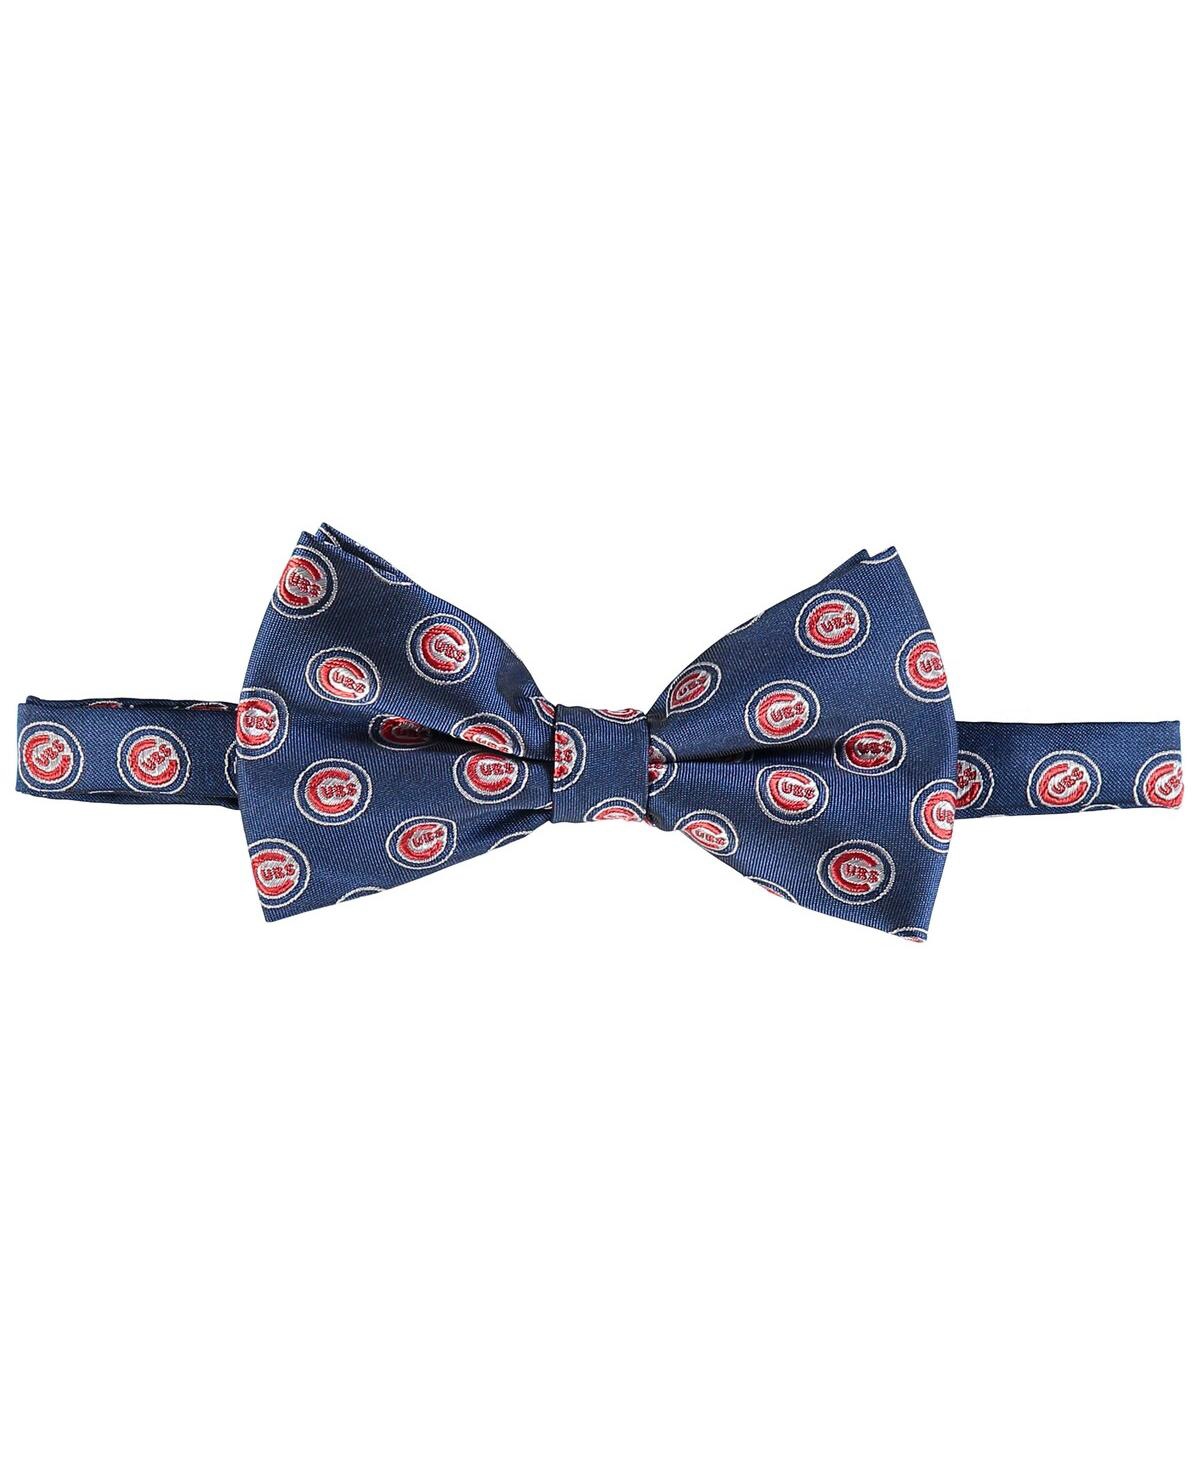 Eagles Wings Men's Royal Chicago Cubs Repeat Bow Tie